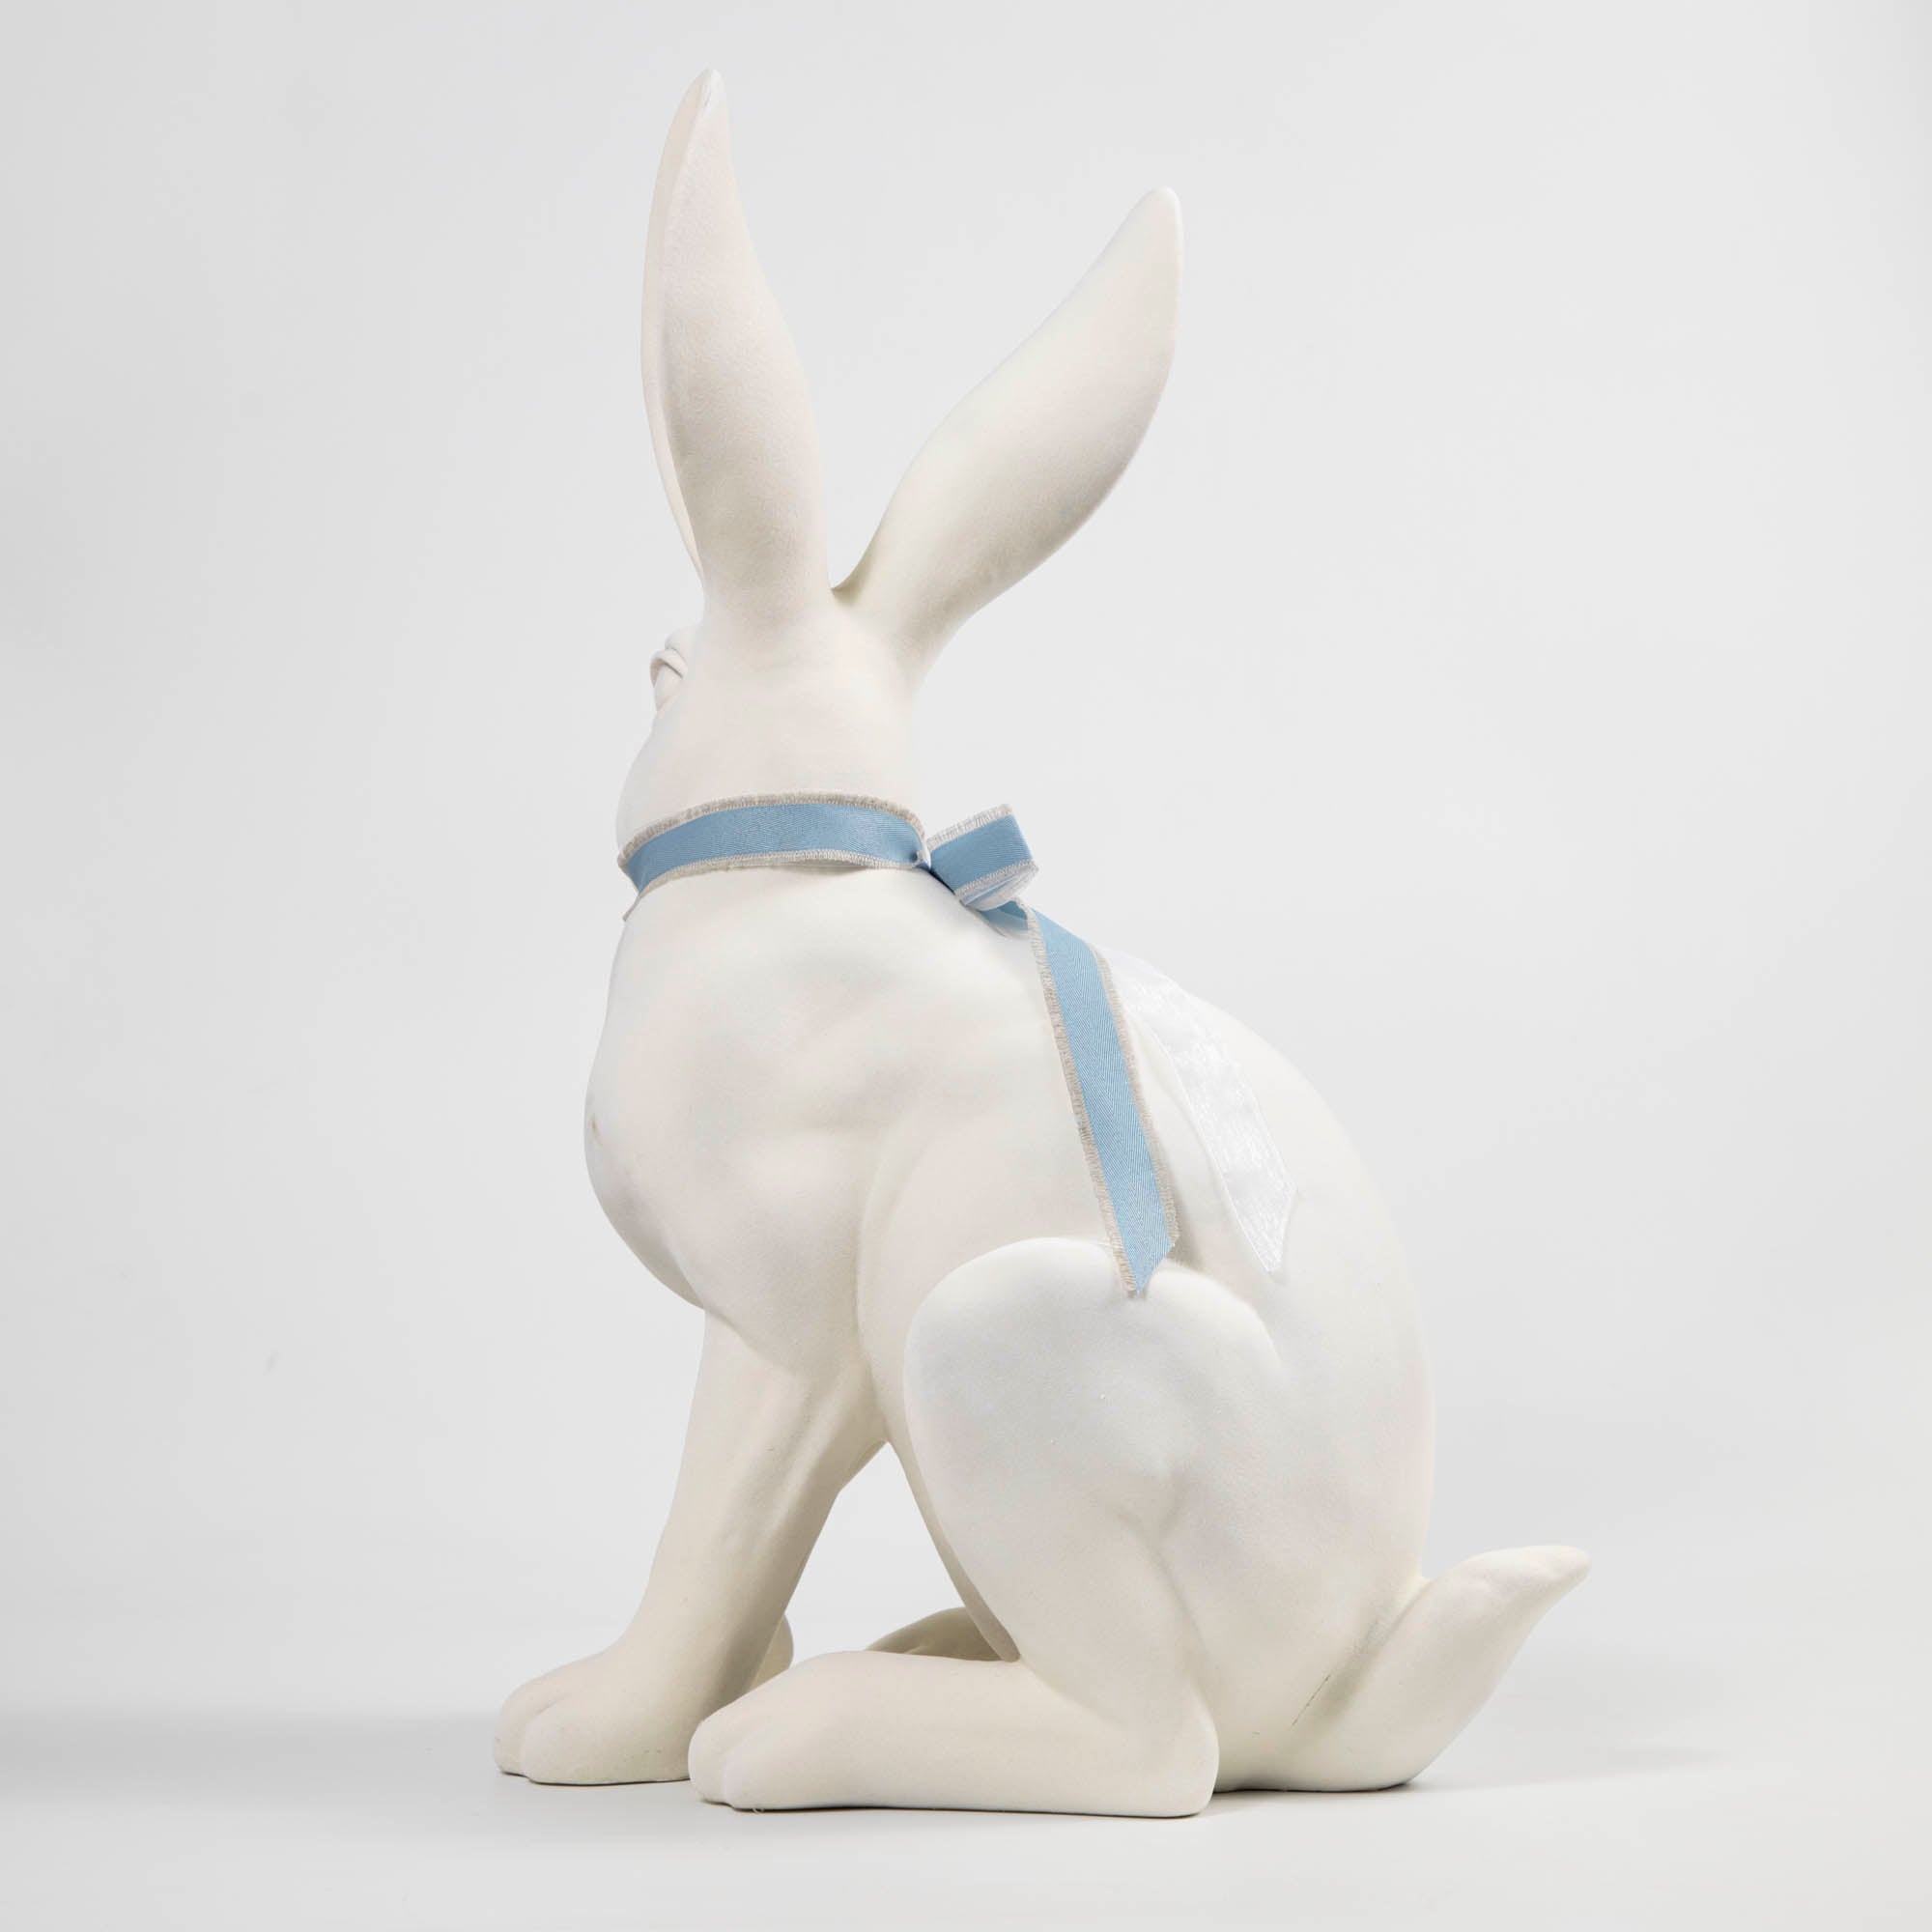 A Flocked Bunny, White &amp; Pink with a blue ribbon around its neck, perfect for Easter decorations from Glitterville.